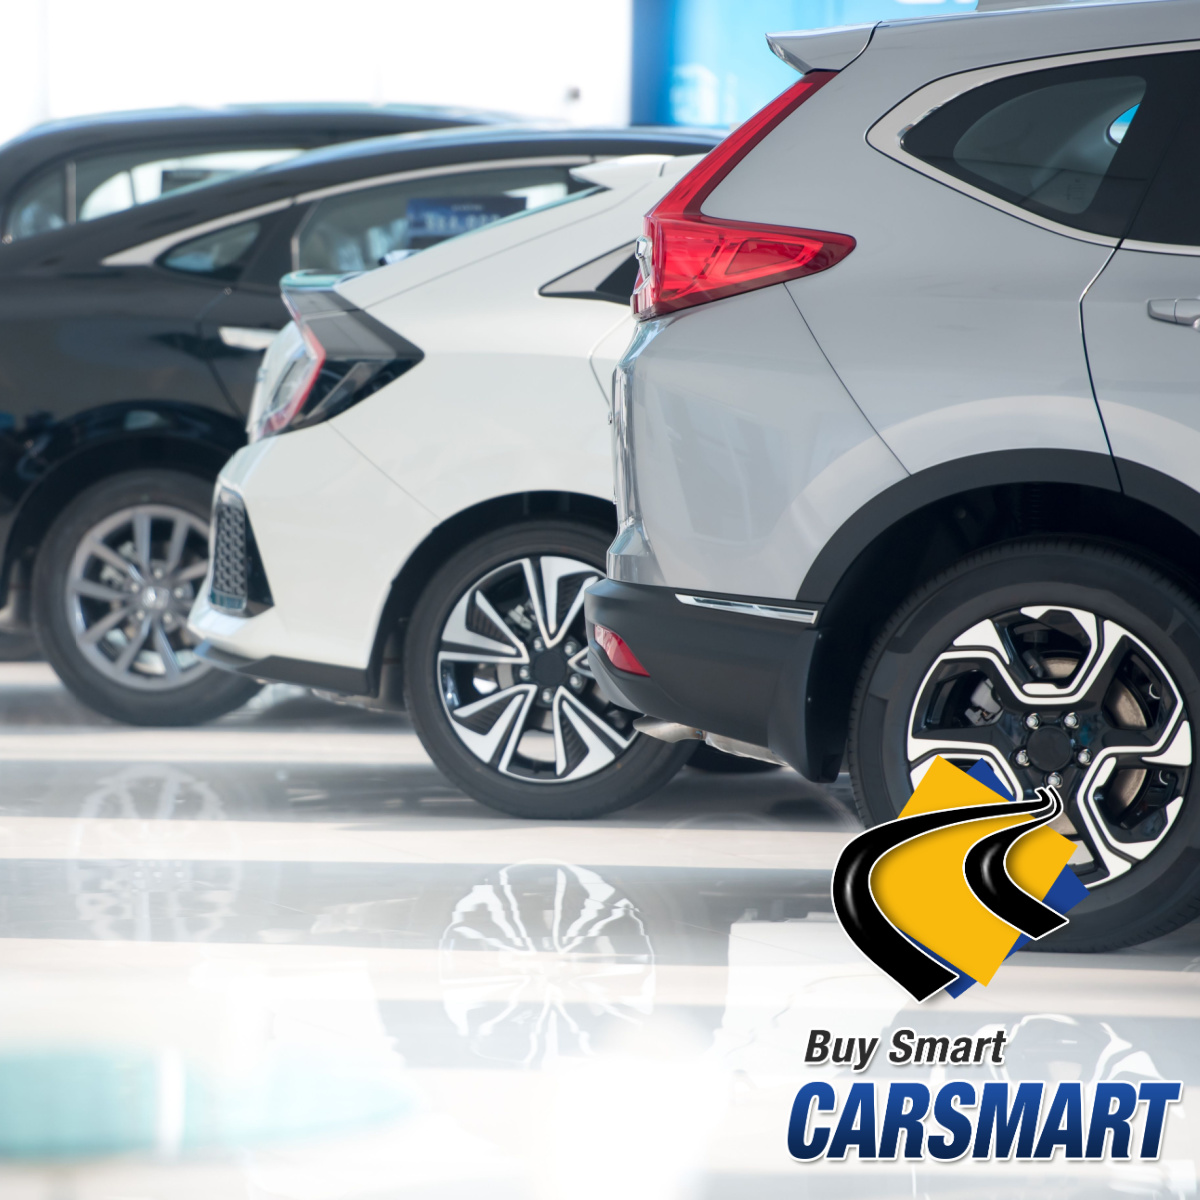 Cruise CarSmart for Great Deals on Used Cars Near Alexandria!